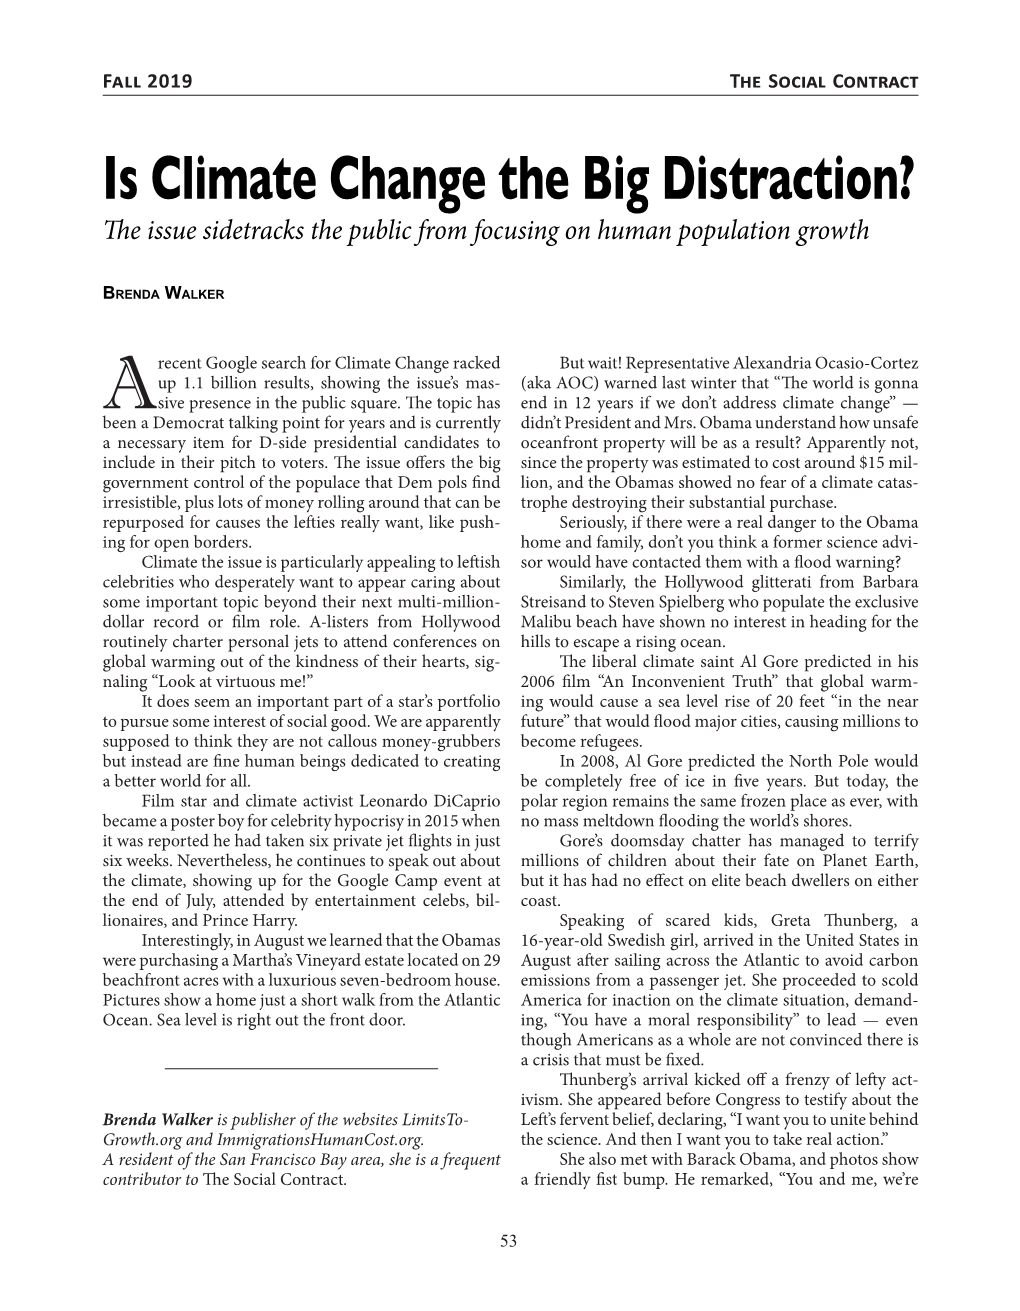 Is Climate Change the Big Distraction? the Issue Sidetracks the Public from Focusing on Human Population Growth